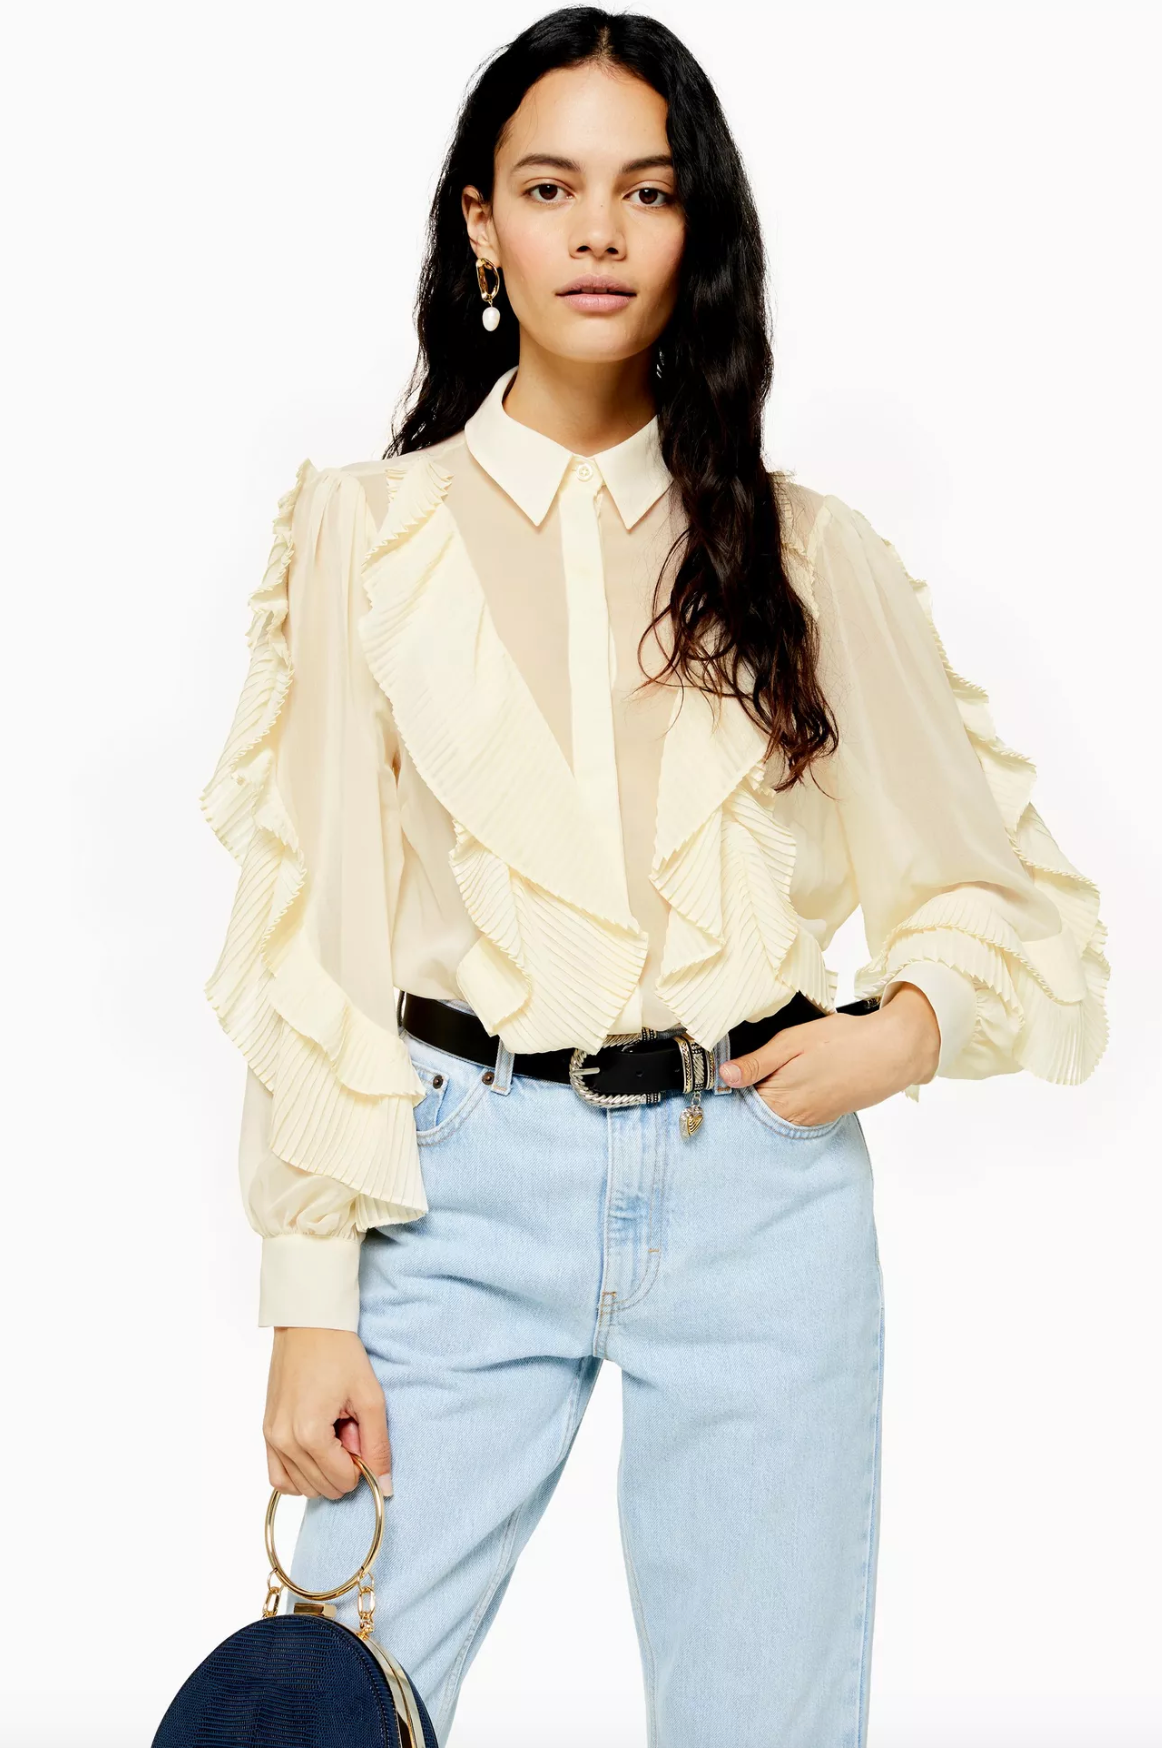 Go For the Flair With These Extravagantly Sleeved Tops